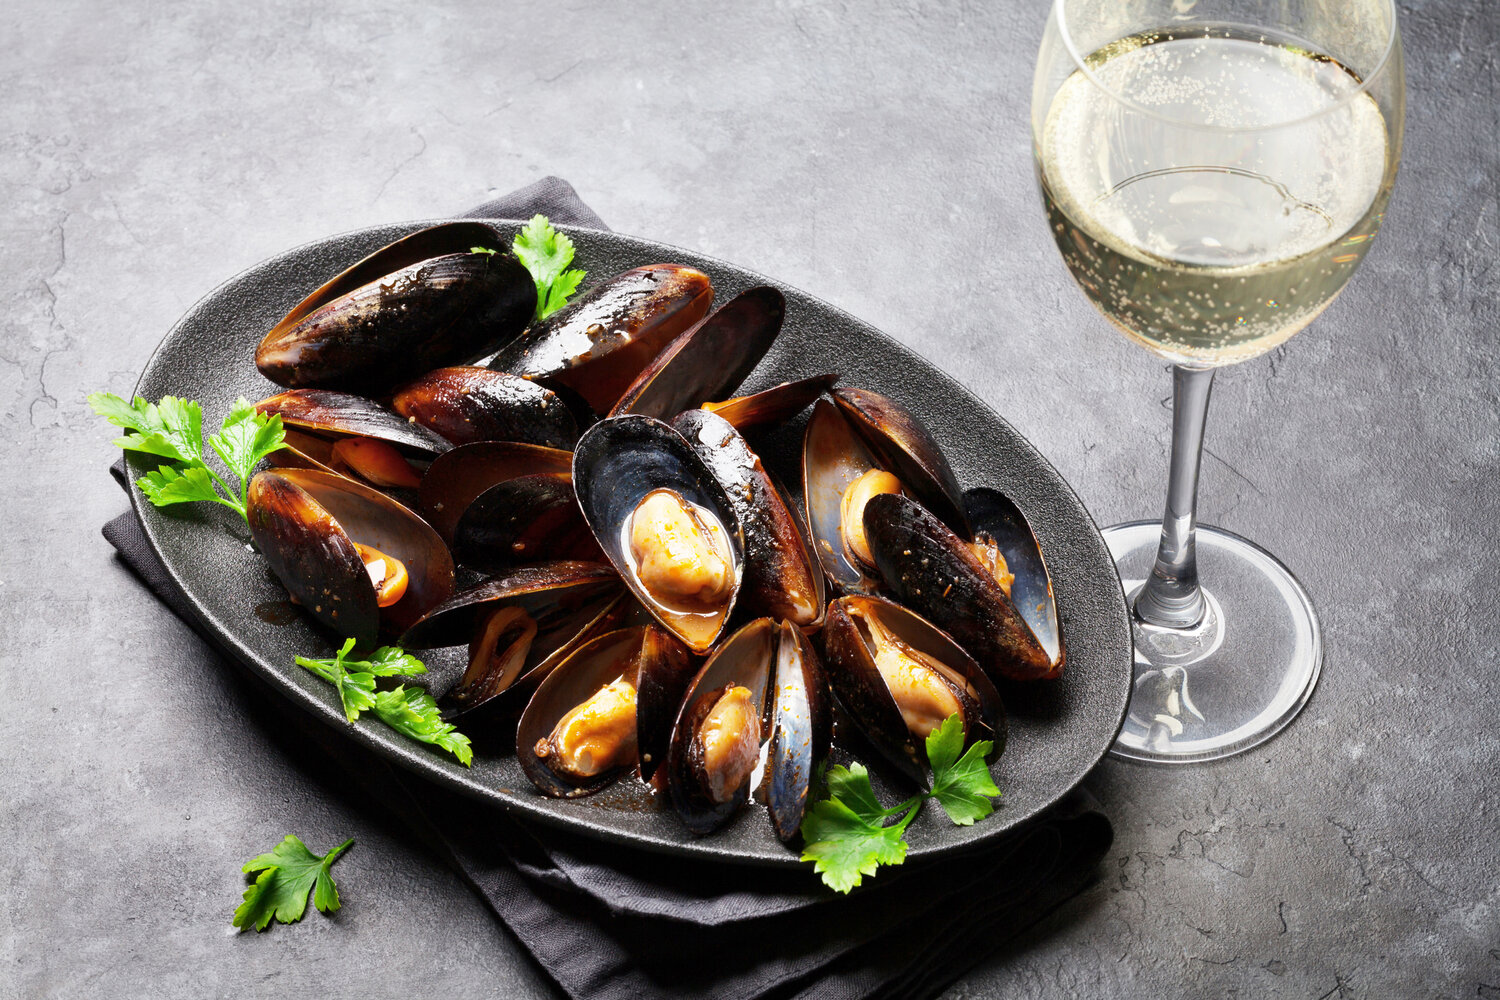 Mussels in a white wine sauce with shallots, garlic, tomato and lemon pair nicely with a New Zealand Sauvignon Blanc like Grey’s Peak.